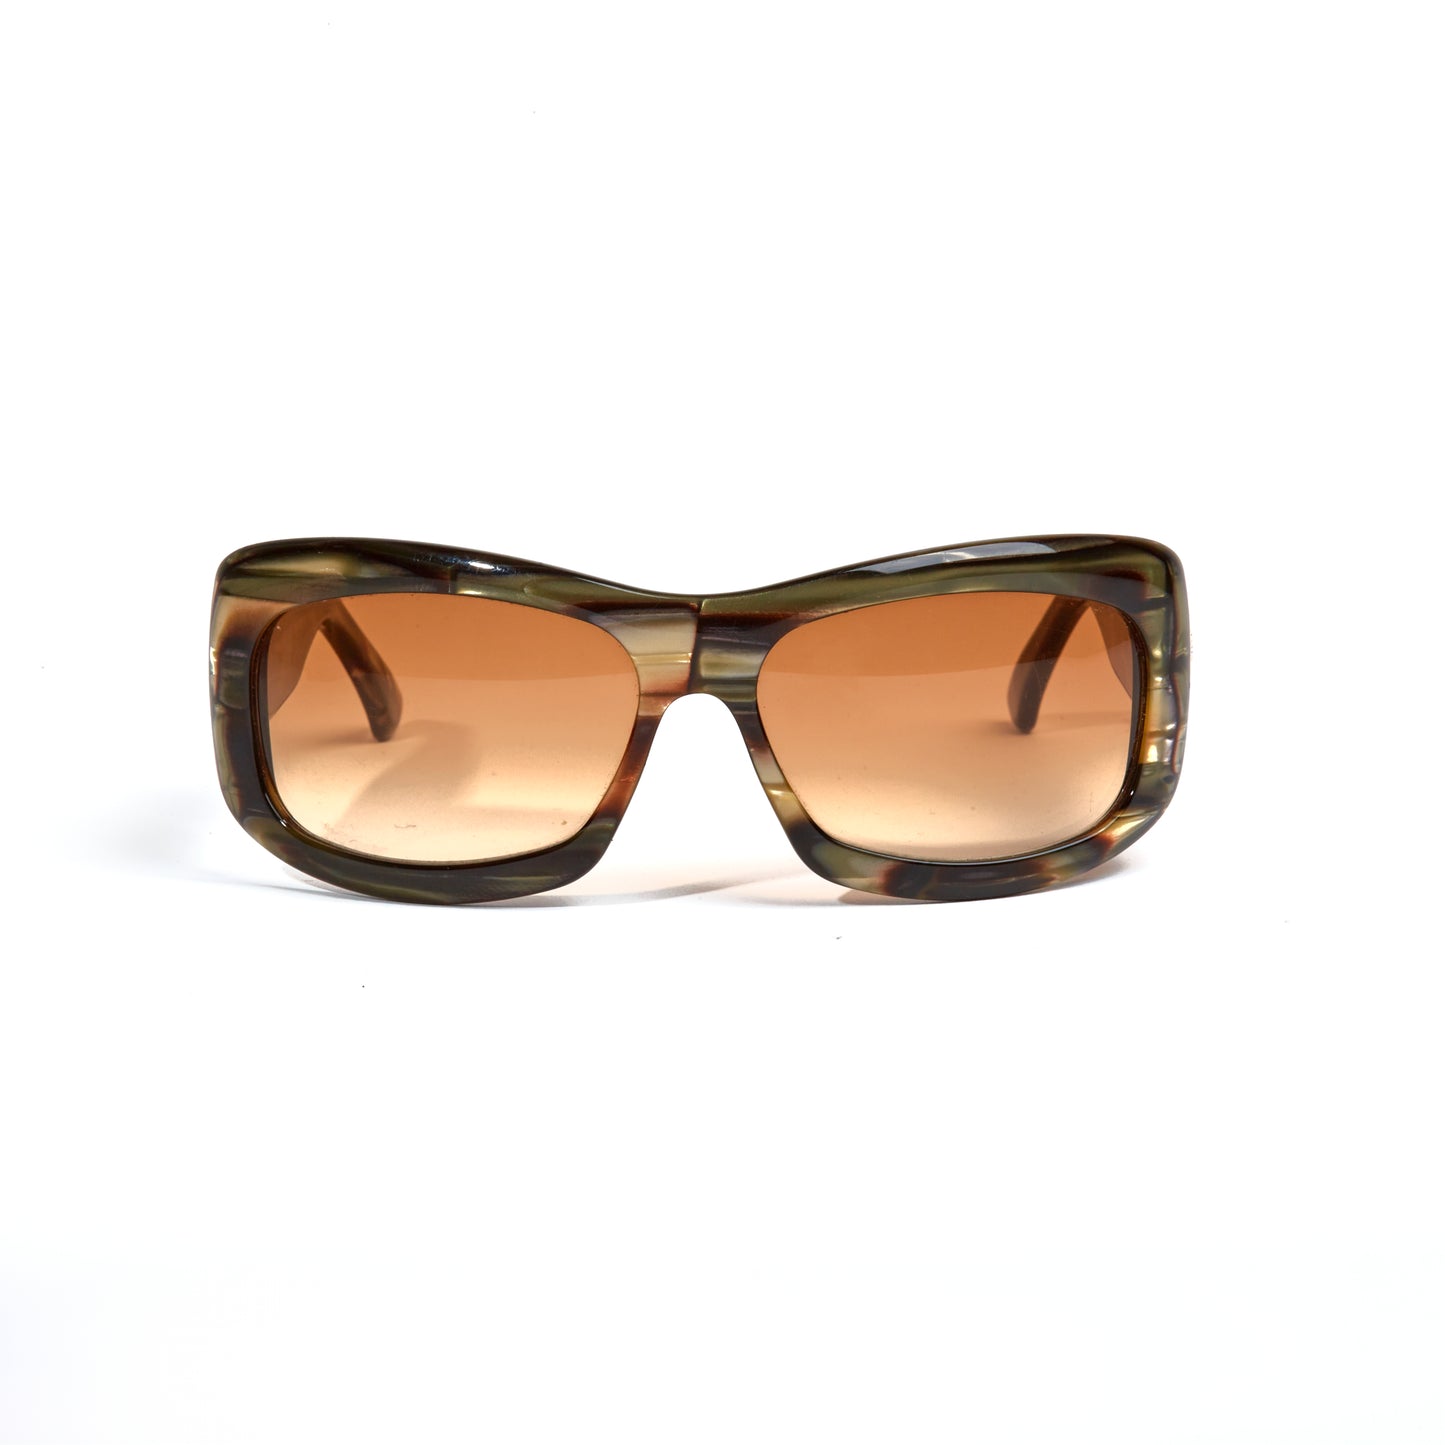 Vintage Gucci Mother of Pearl Strass Sunglasses